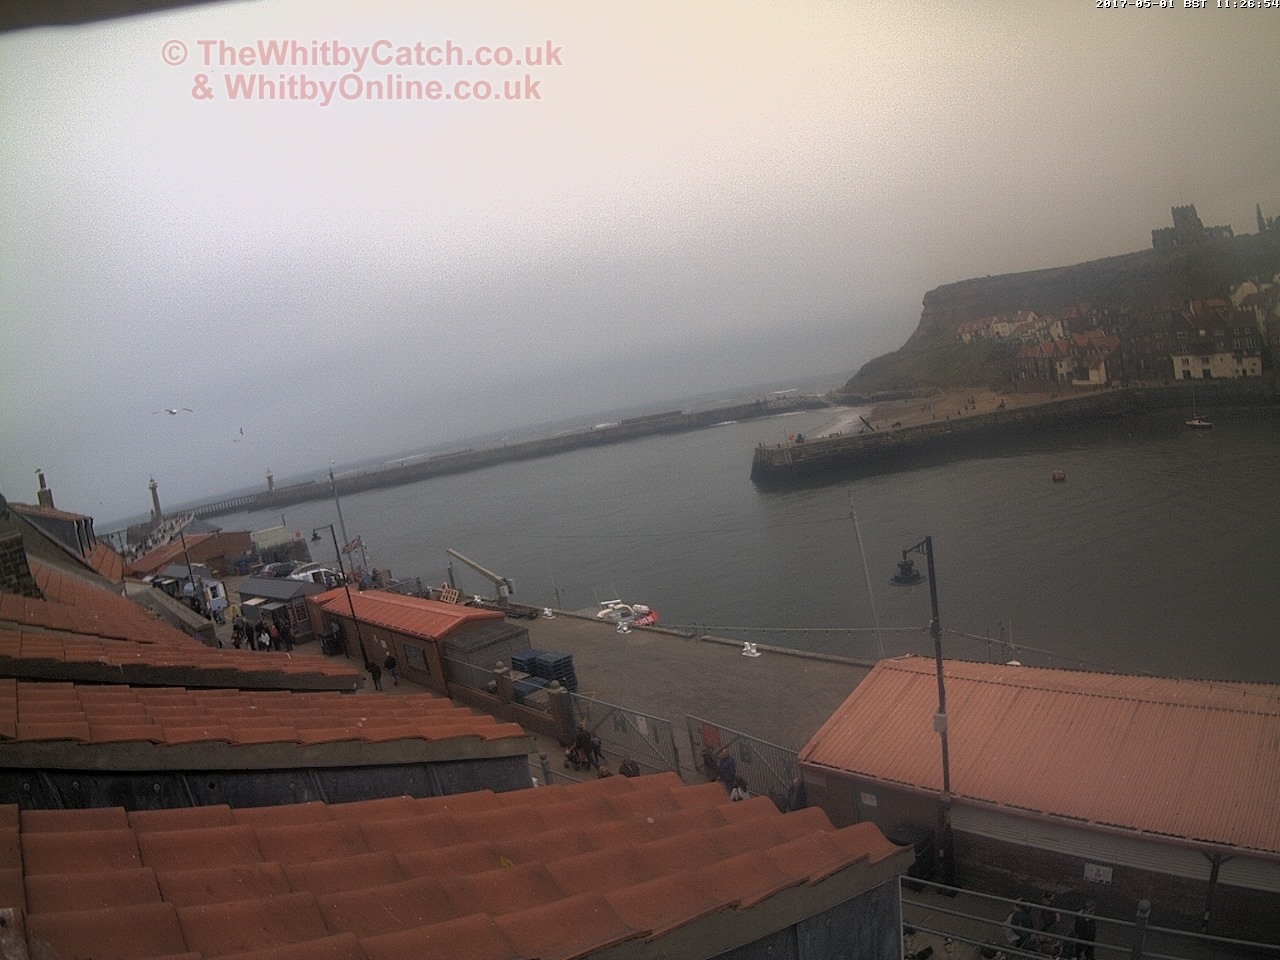 Whitby Mon 1st May 2017 11:27.